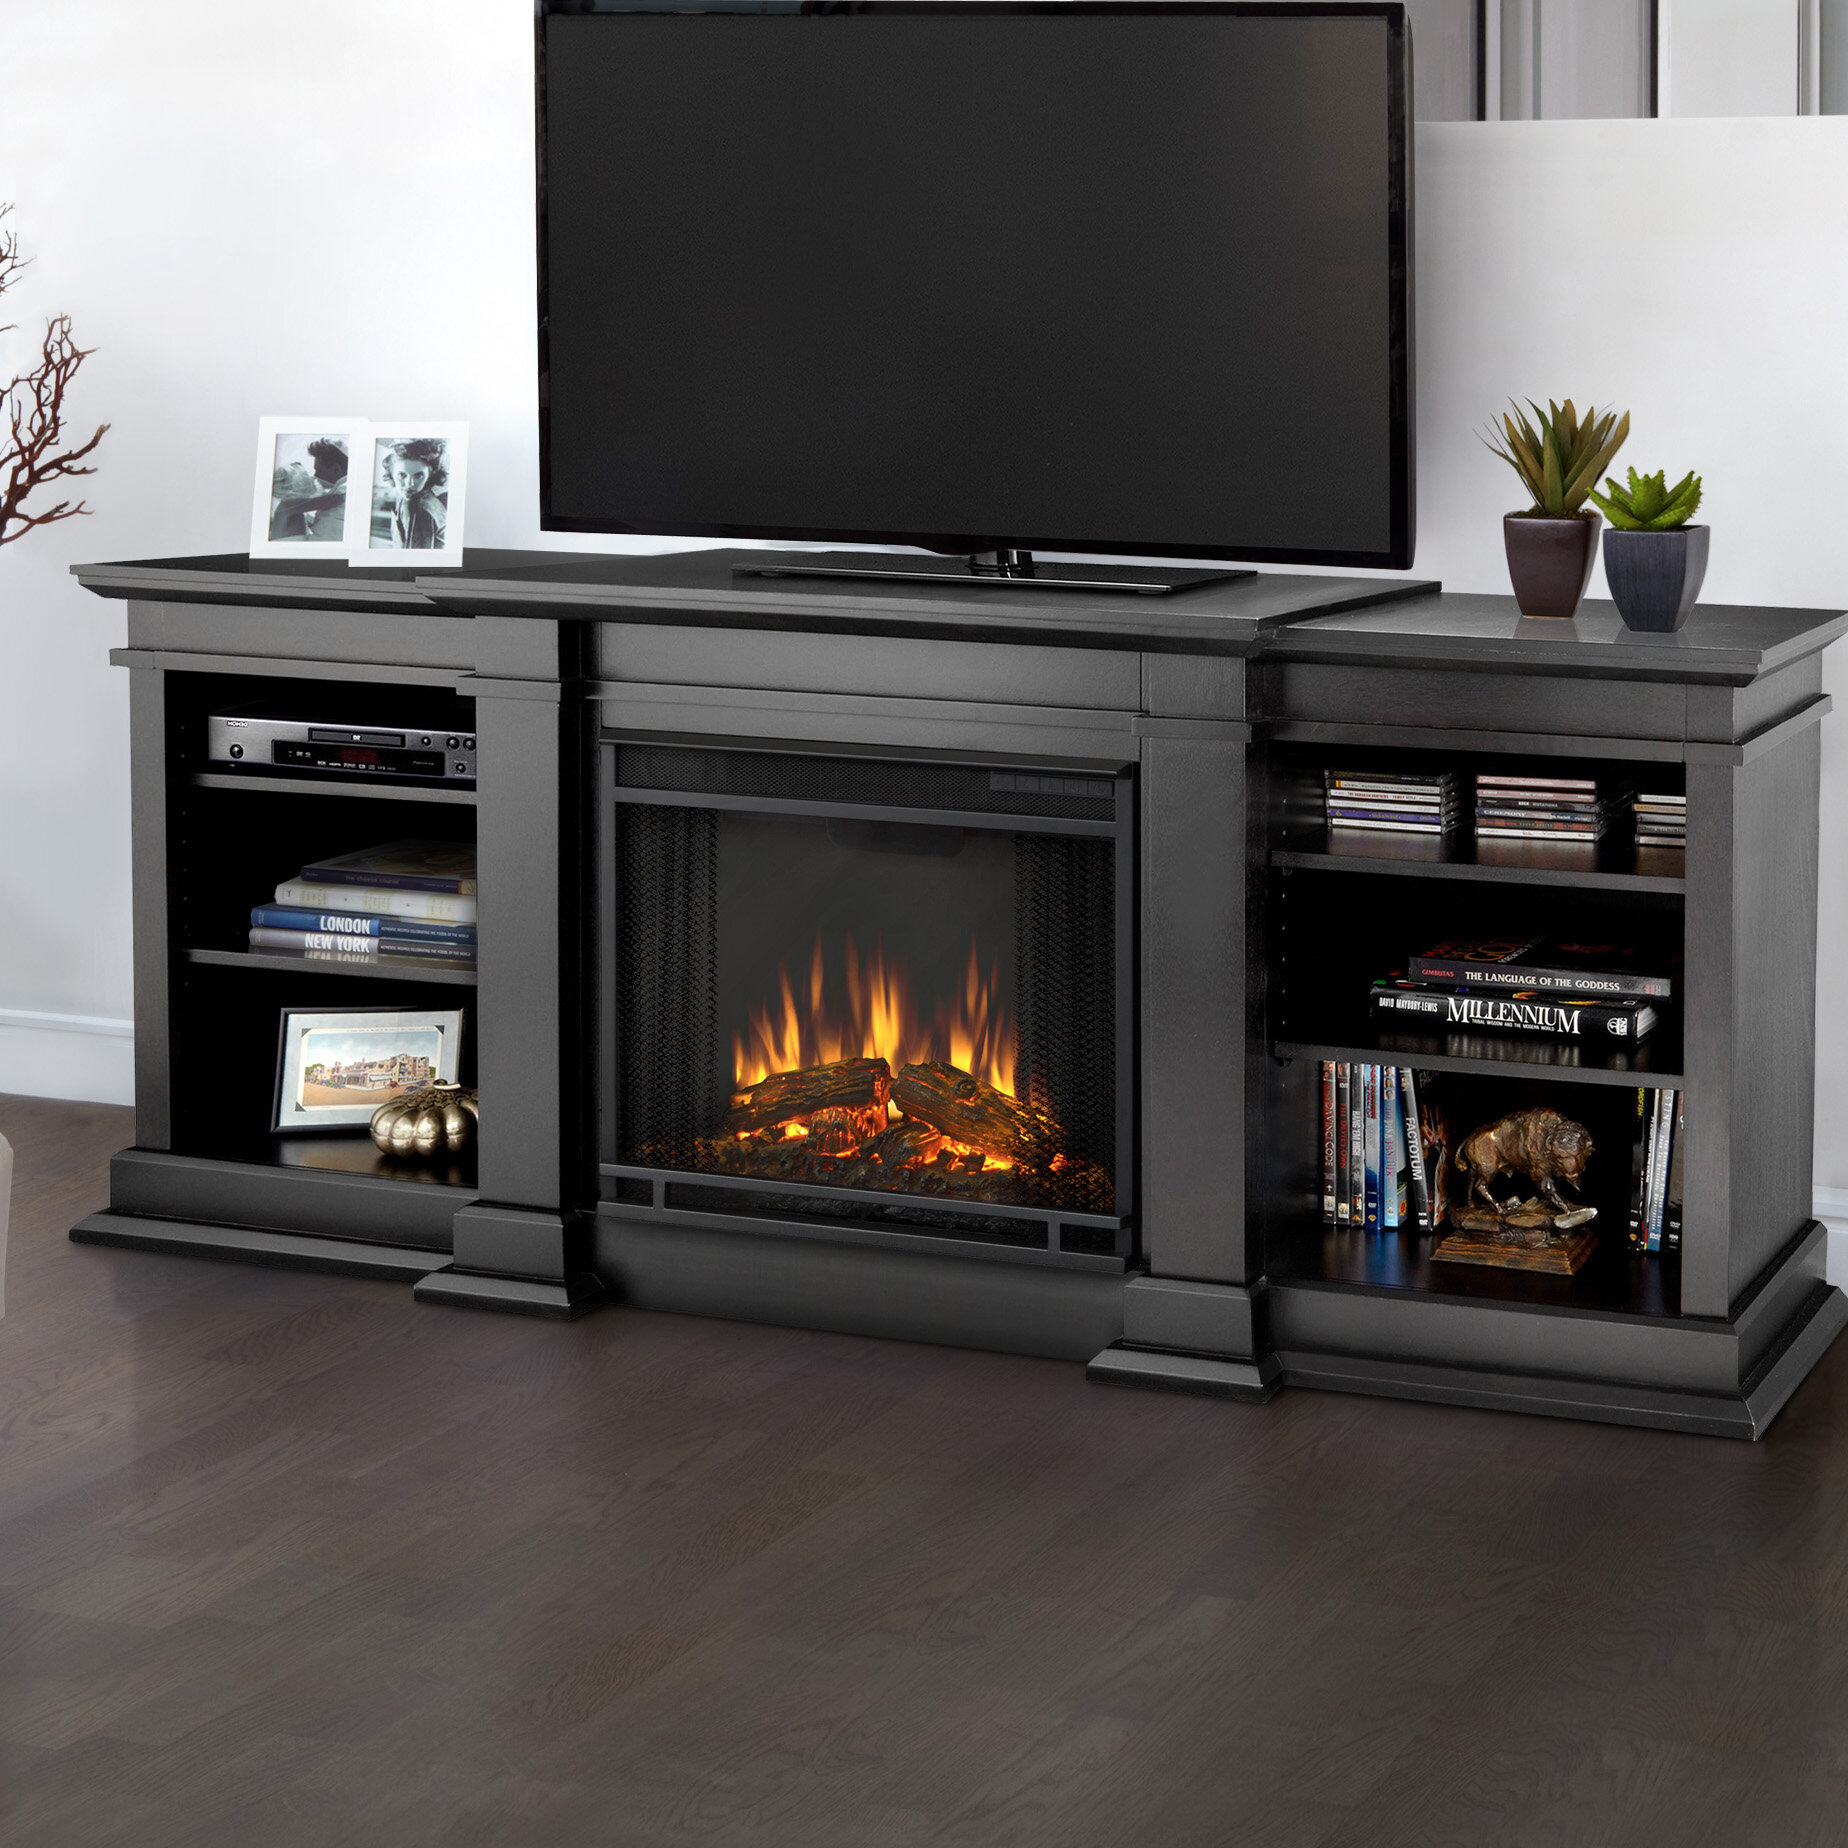 Best Prices On Electric Fireplaces Beautiful 23 Fresh Electric Fireplace Wall Units Entertainment Center